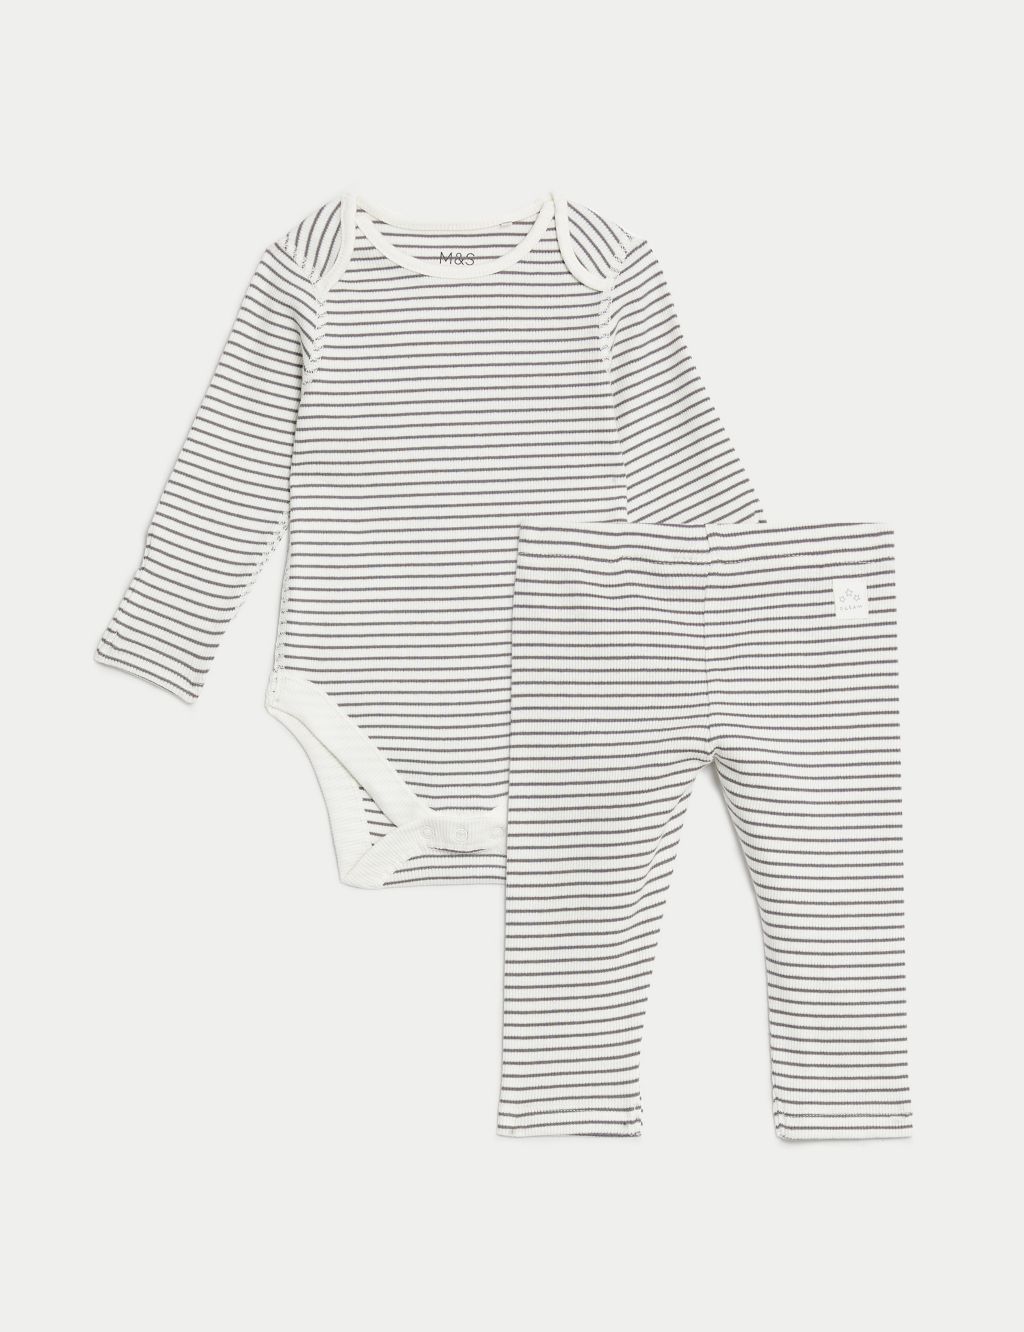 2pc Cotton Rich Striped Outfit (0-1 Yrs) image 1